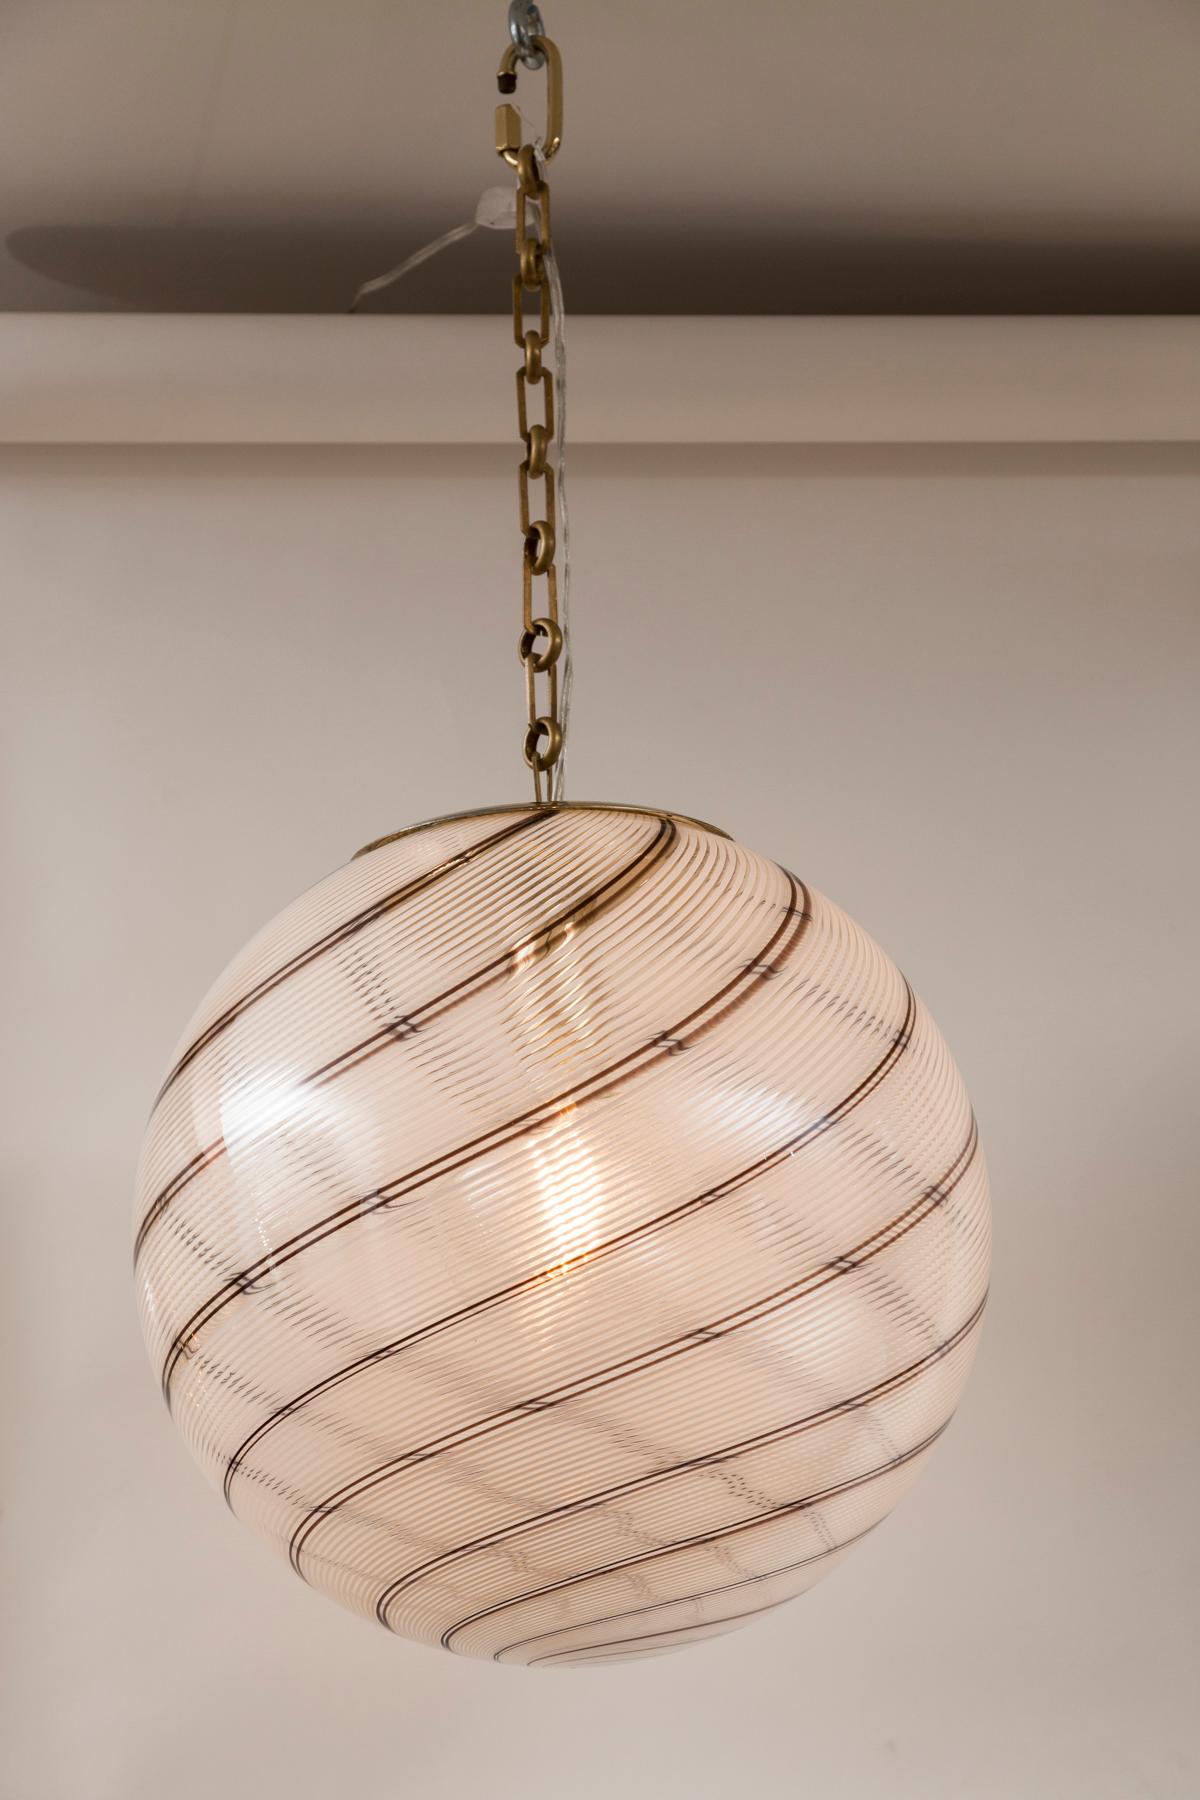  Lovely pair of  large clear blown glass globe shaped globes with a swirl of filigrini tobacco and white.
Recently re-electrified with new medium base E26 socket and made install ready with beautiful brass chain and canopy of your choice.